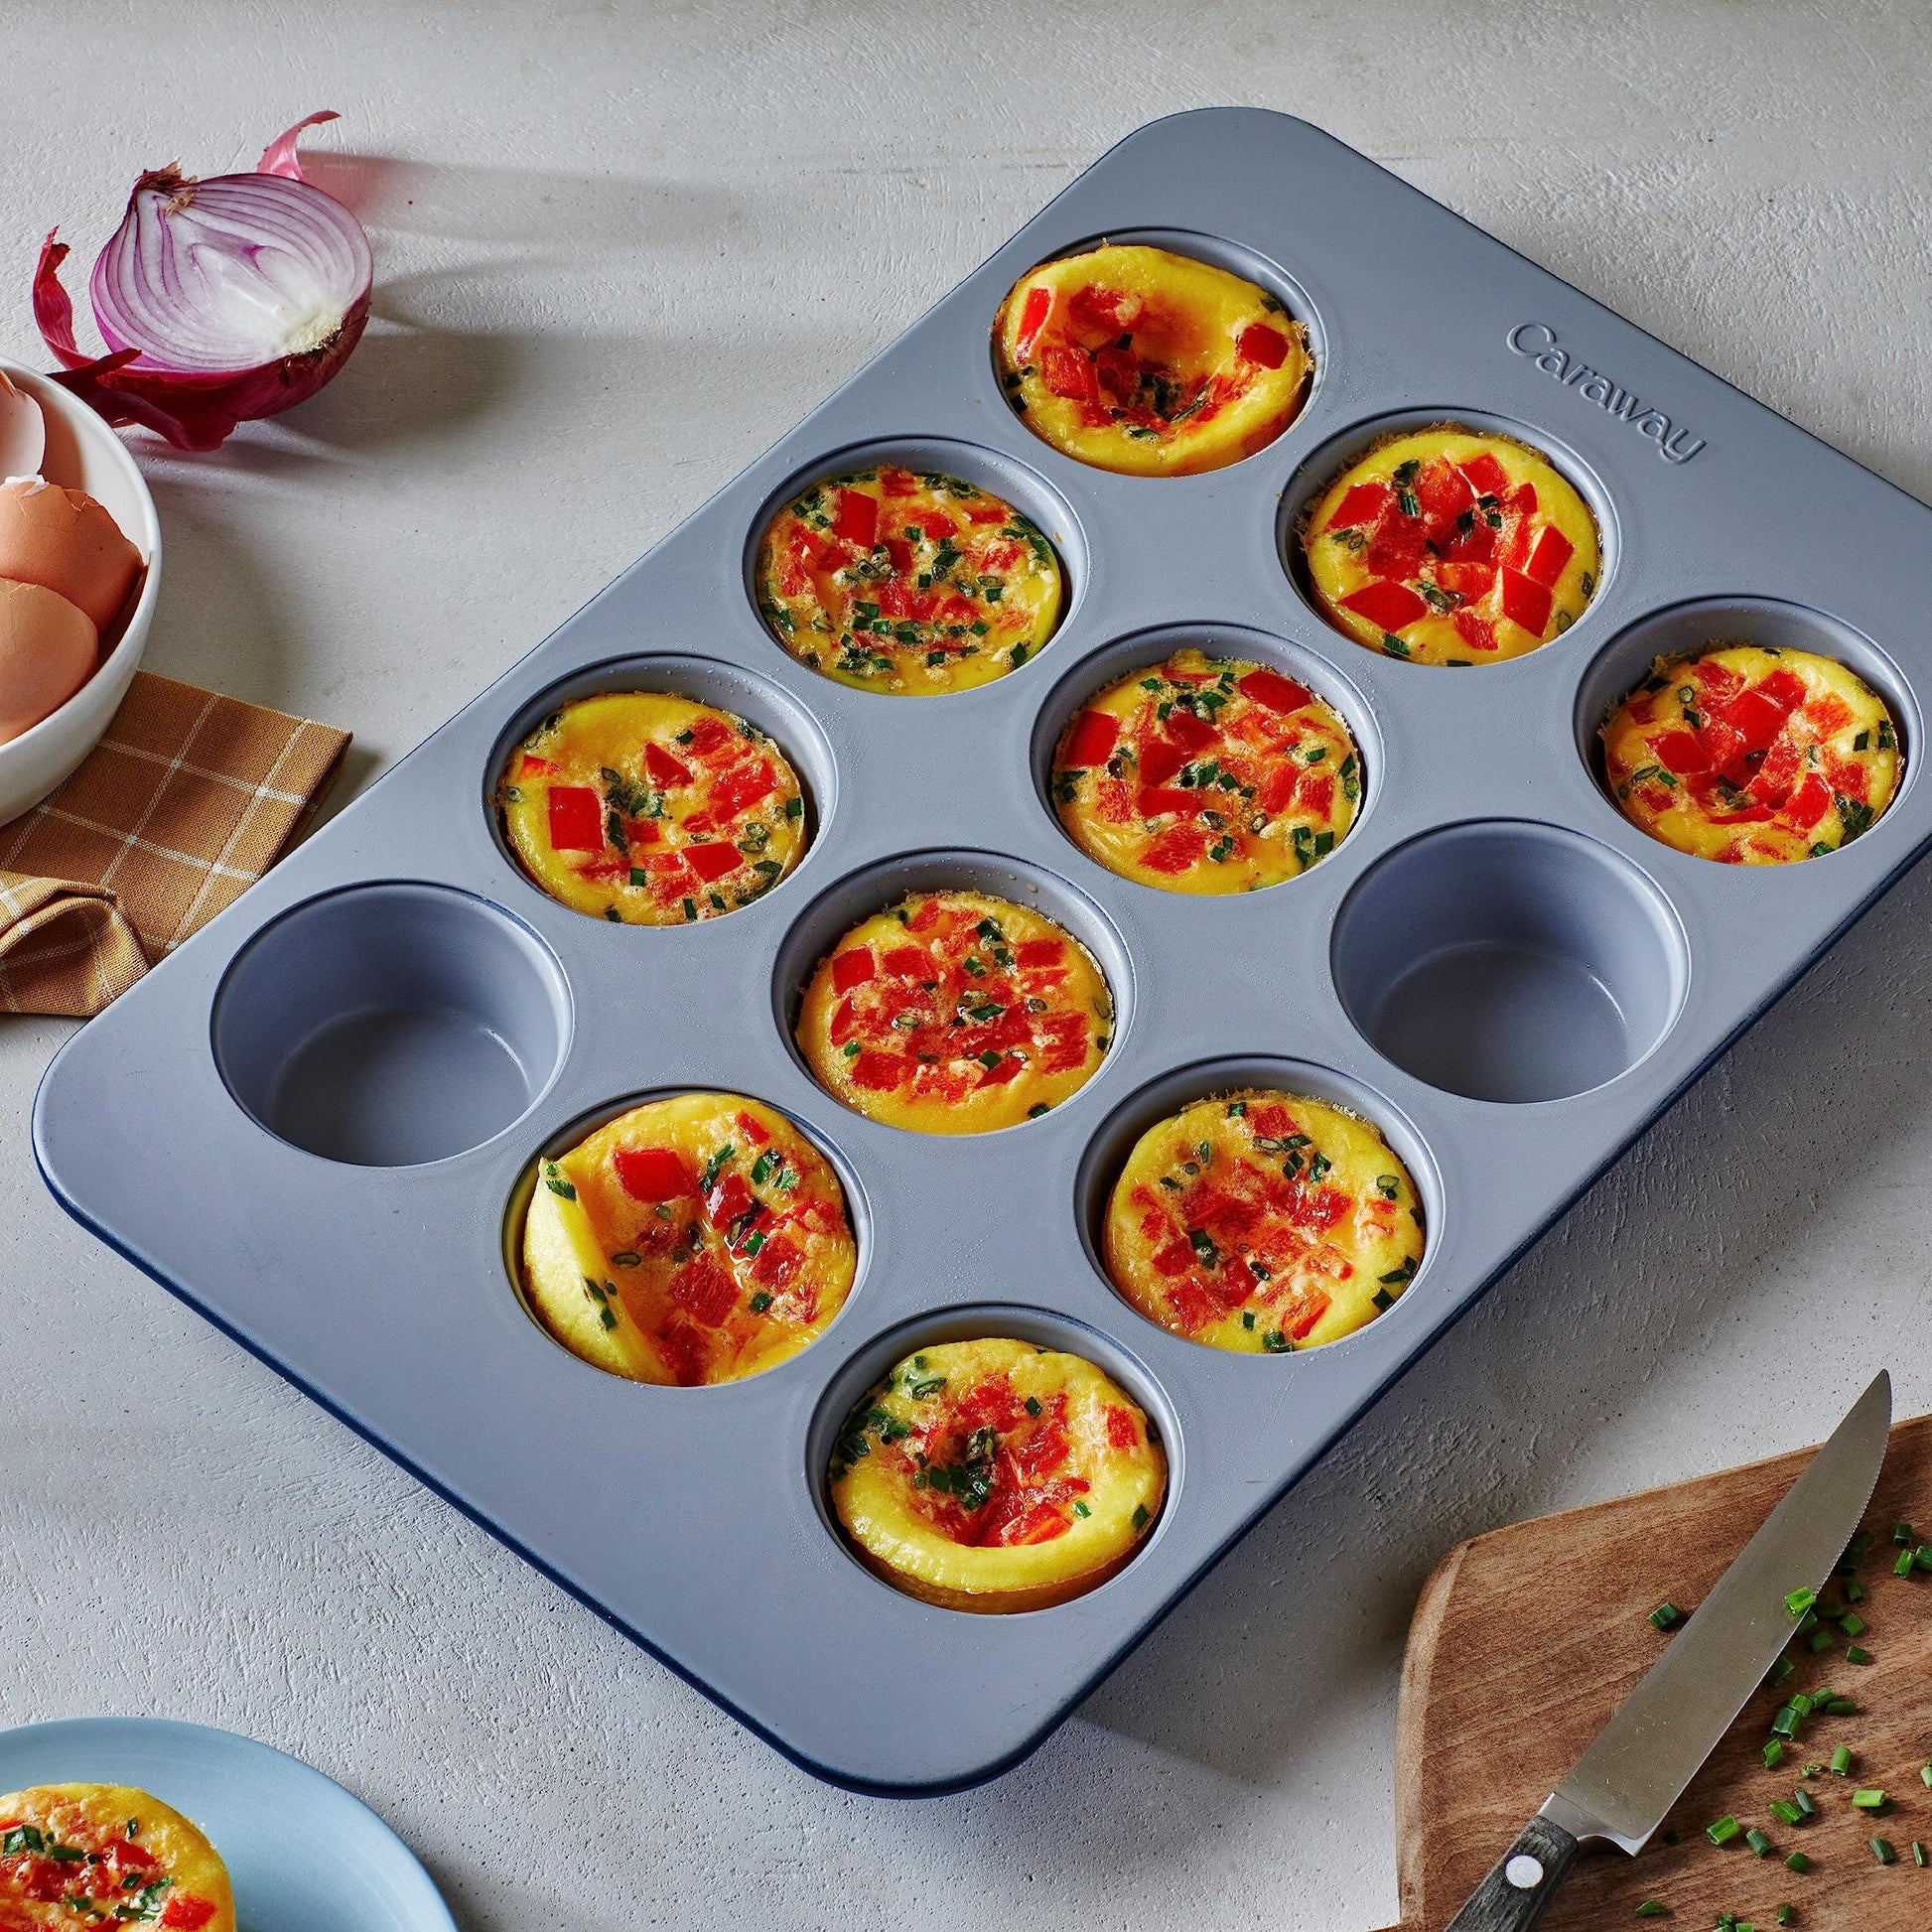 Caraway Non-Stick Ceramic 12-Cup Muffin Pan - Naturally Slick Ceramic Coating - Non-Toxic, PTFE & PFOA Free - Perfect for Cupcakes, Muffins, and More - Navy - CookCave